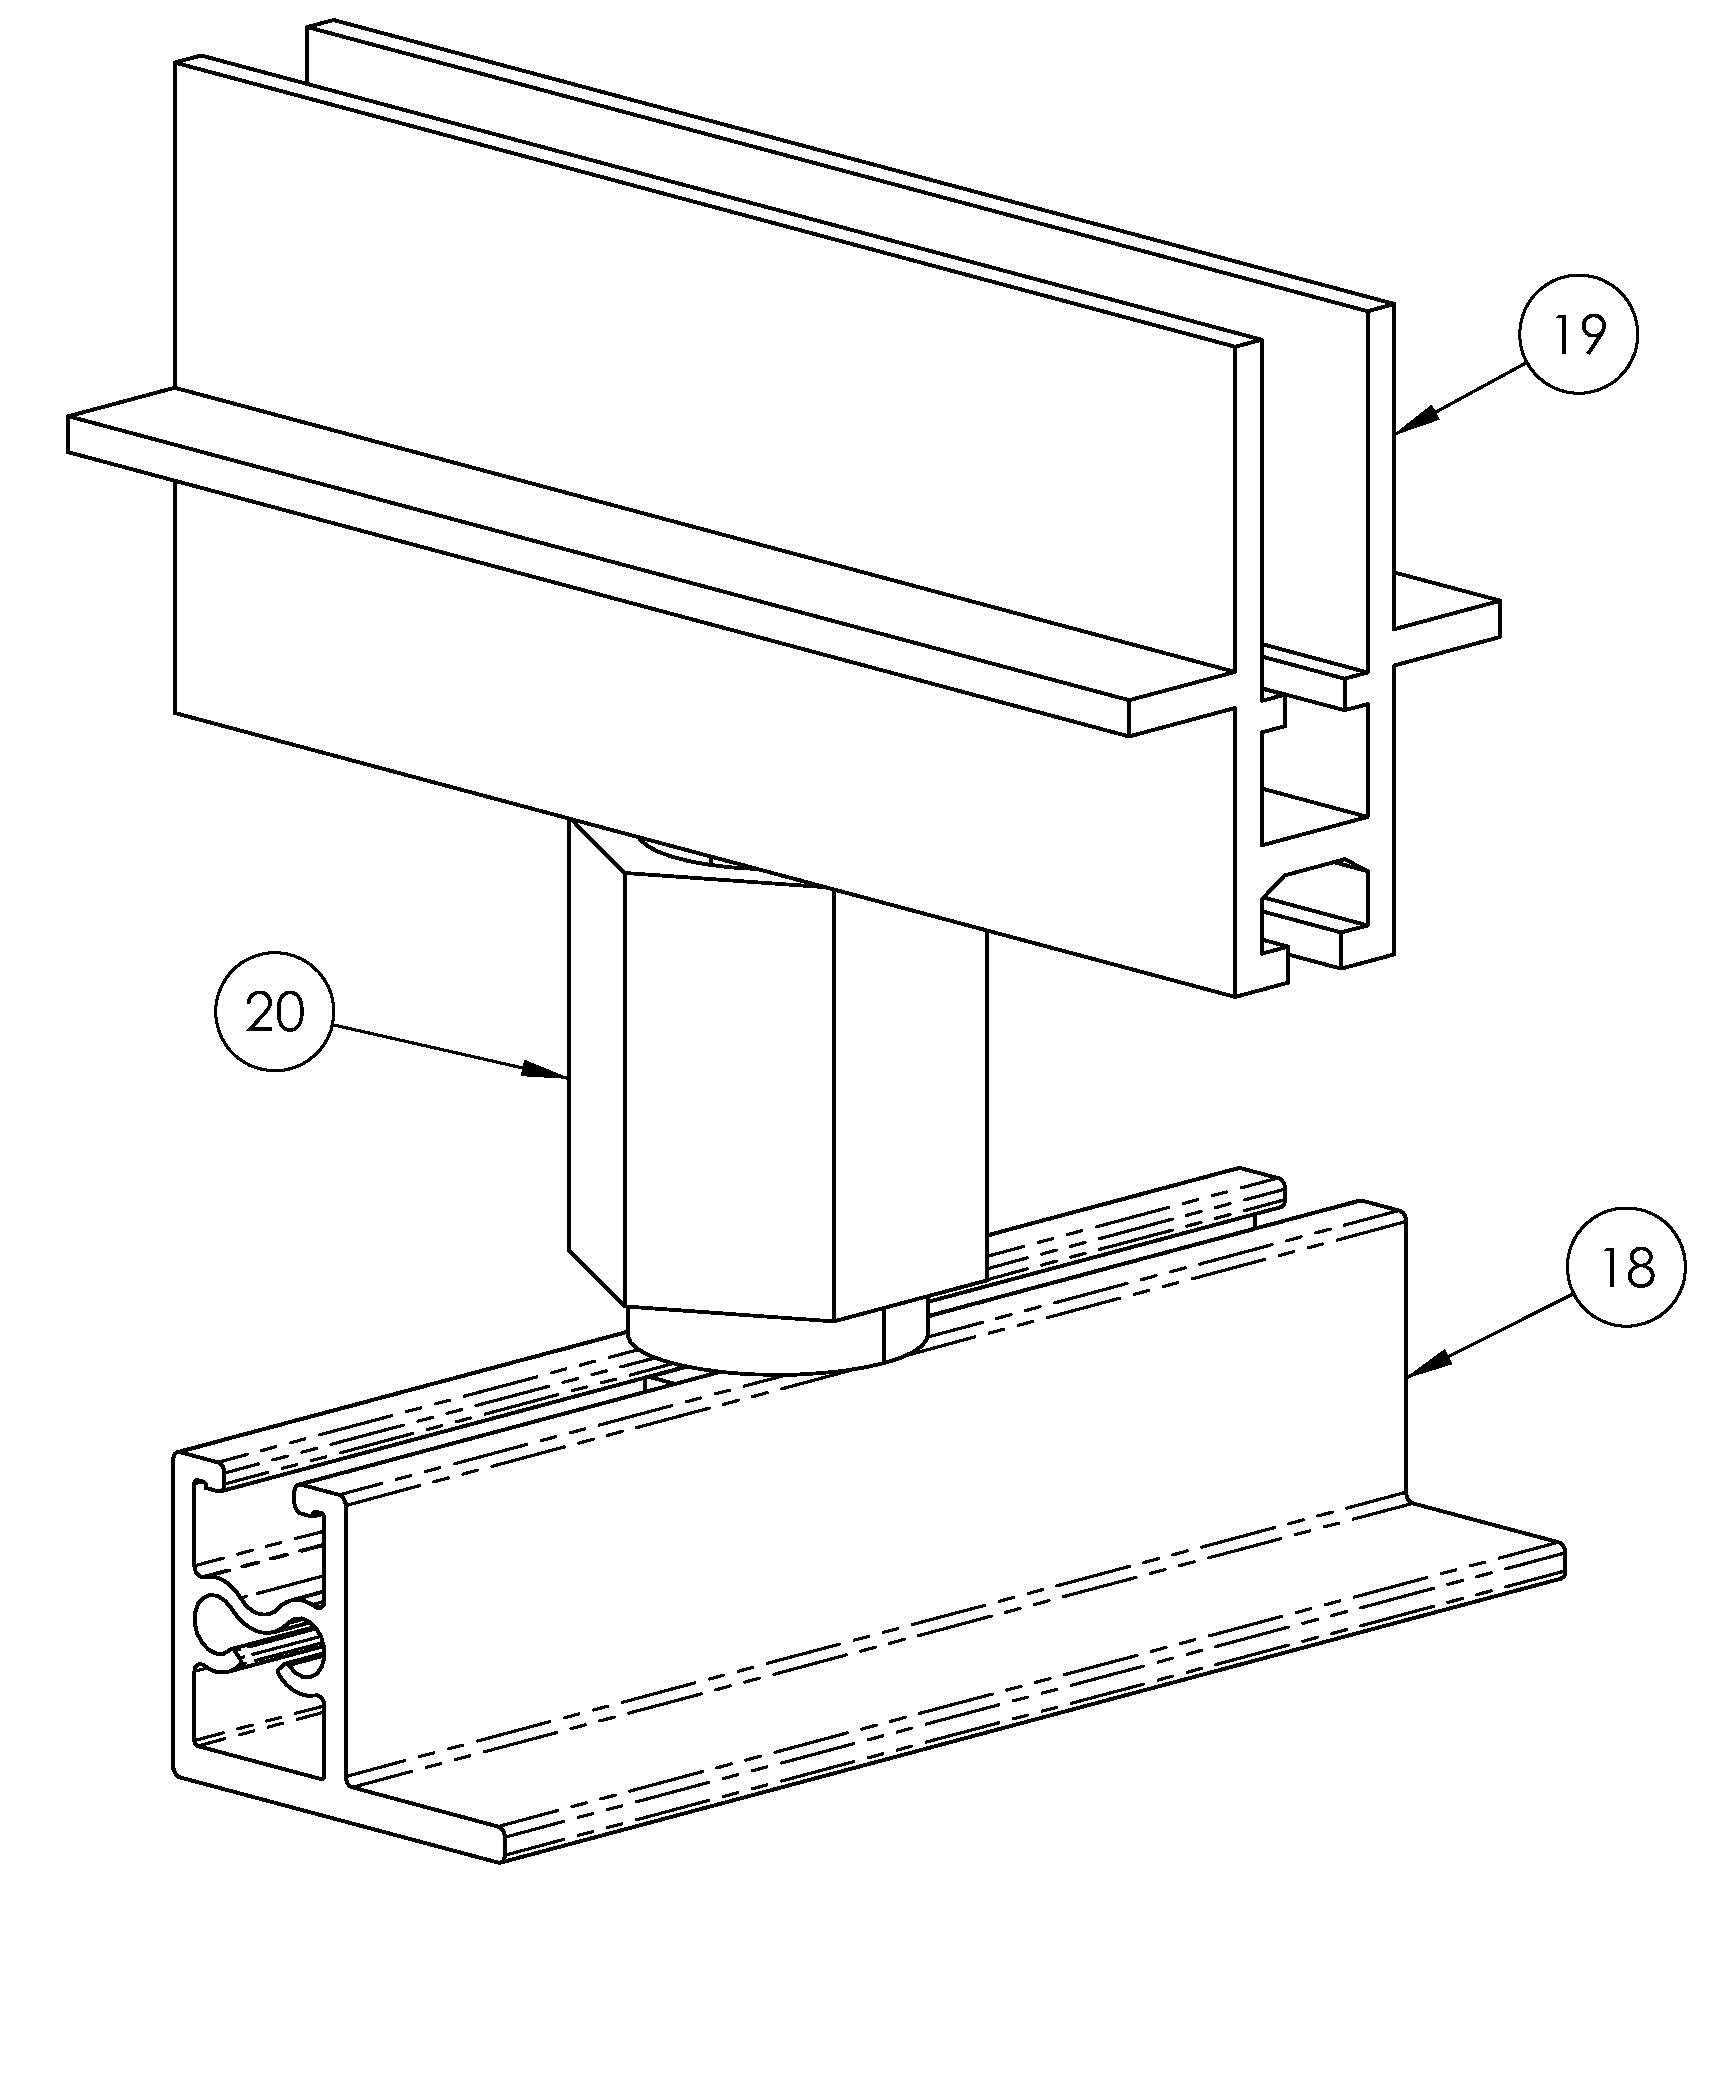 Photovoltaic mounting system with locking connectors, adjustable rail height and hinge lock